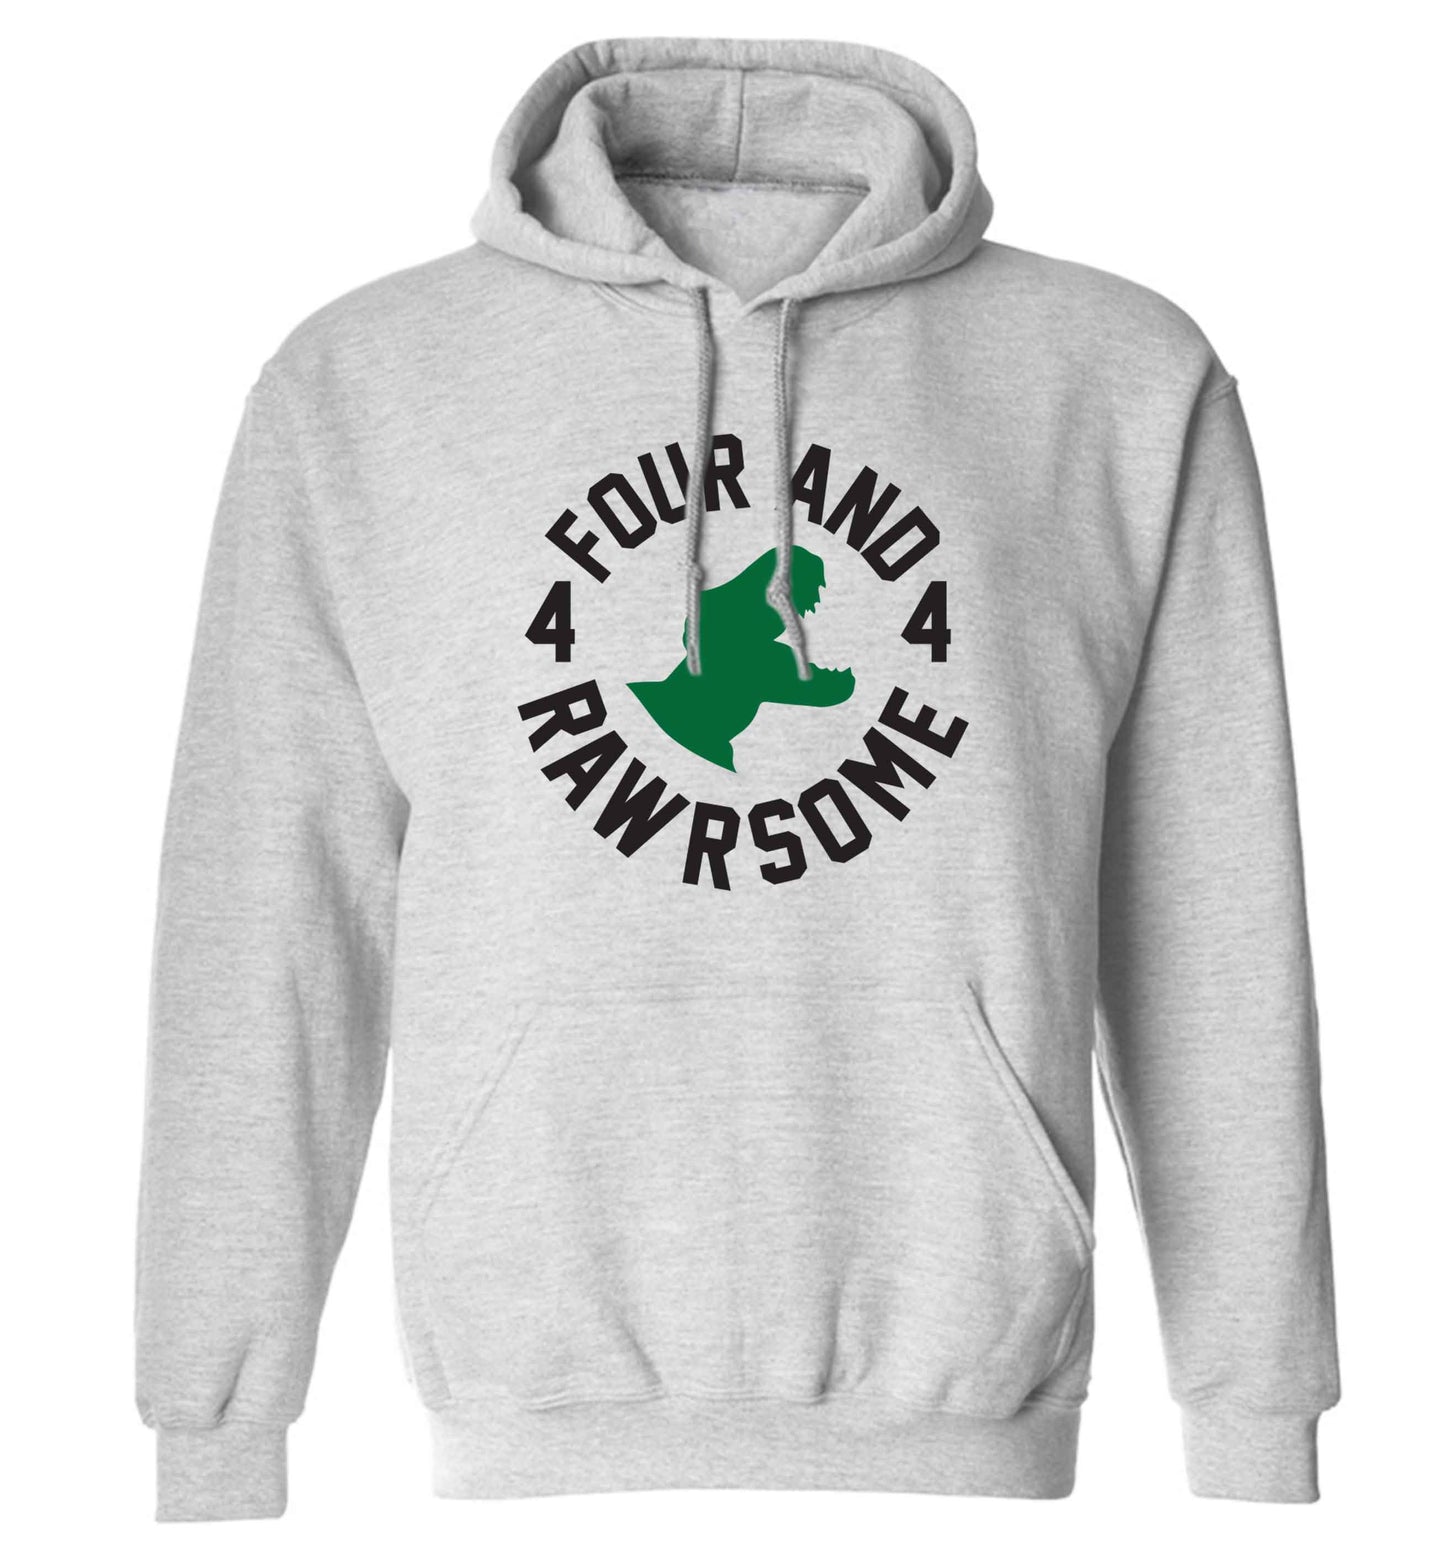 Four and rawrsome adults unisex grey hoodie 2XL